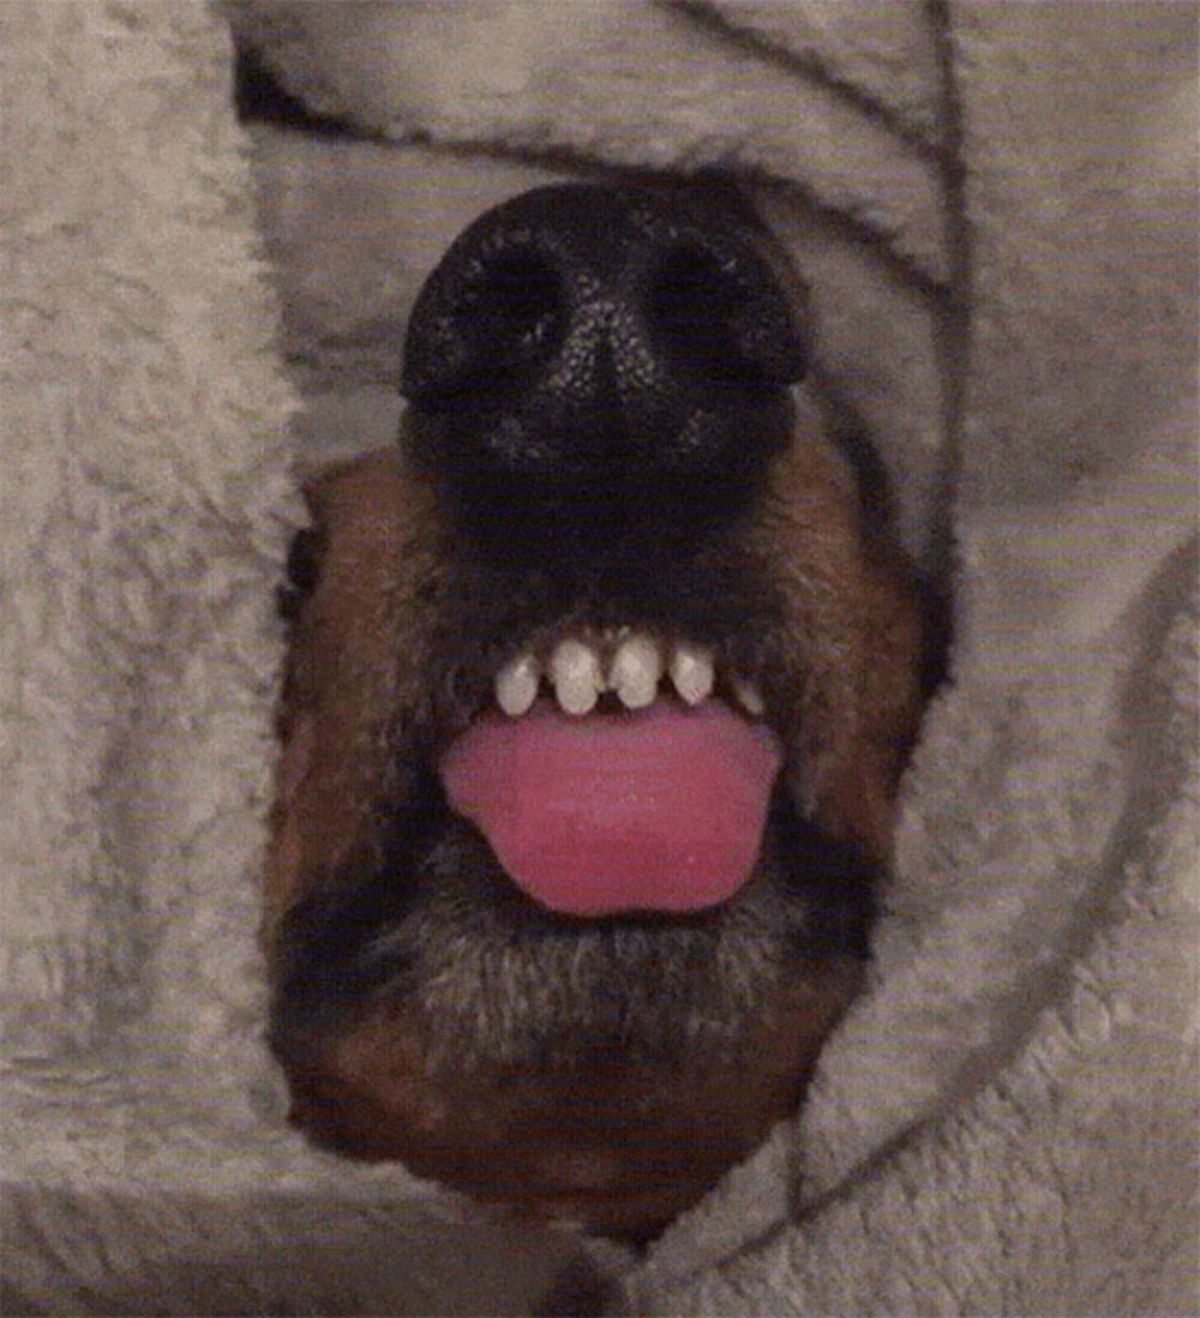 brown dog's mouth showing through a fuzzy grey blanket with the nose, top teeth and tongue showing